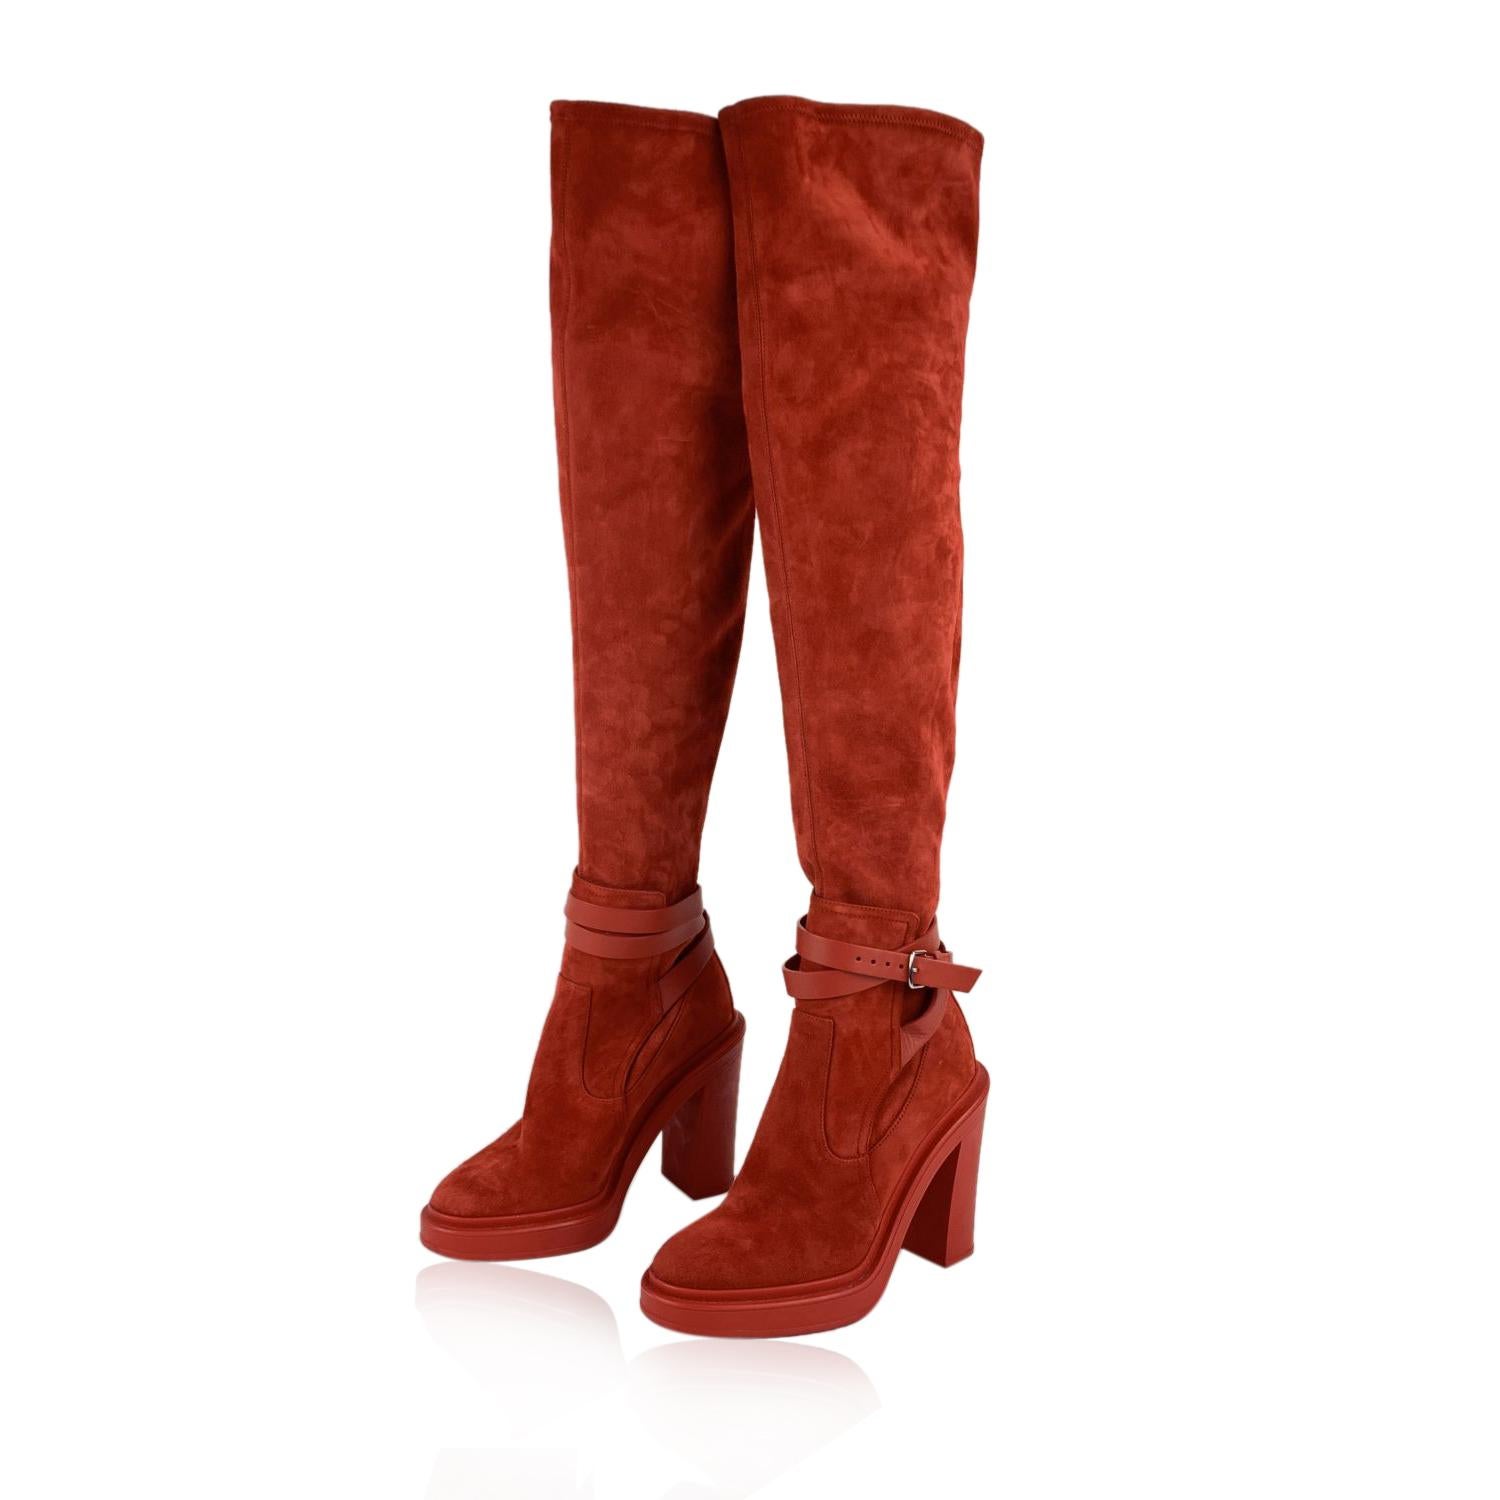 Beautiful Hermes 'Selena' Over-the-knee boots in red suede from the 2018 Fall/Winter collection. They feature a round cap toe, pull-on style, leather wrap straps around the ankles with buckle closure and rubber sole and block heels. Heels Height: